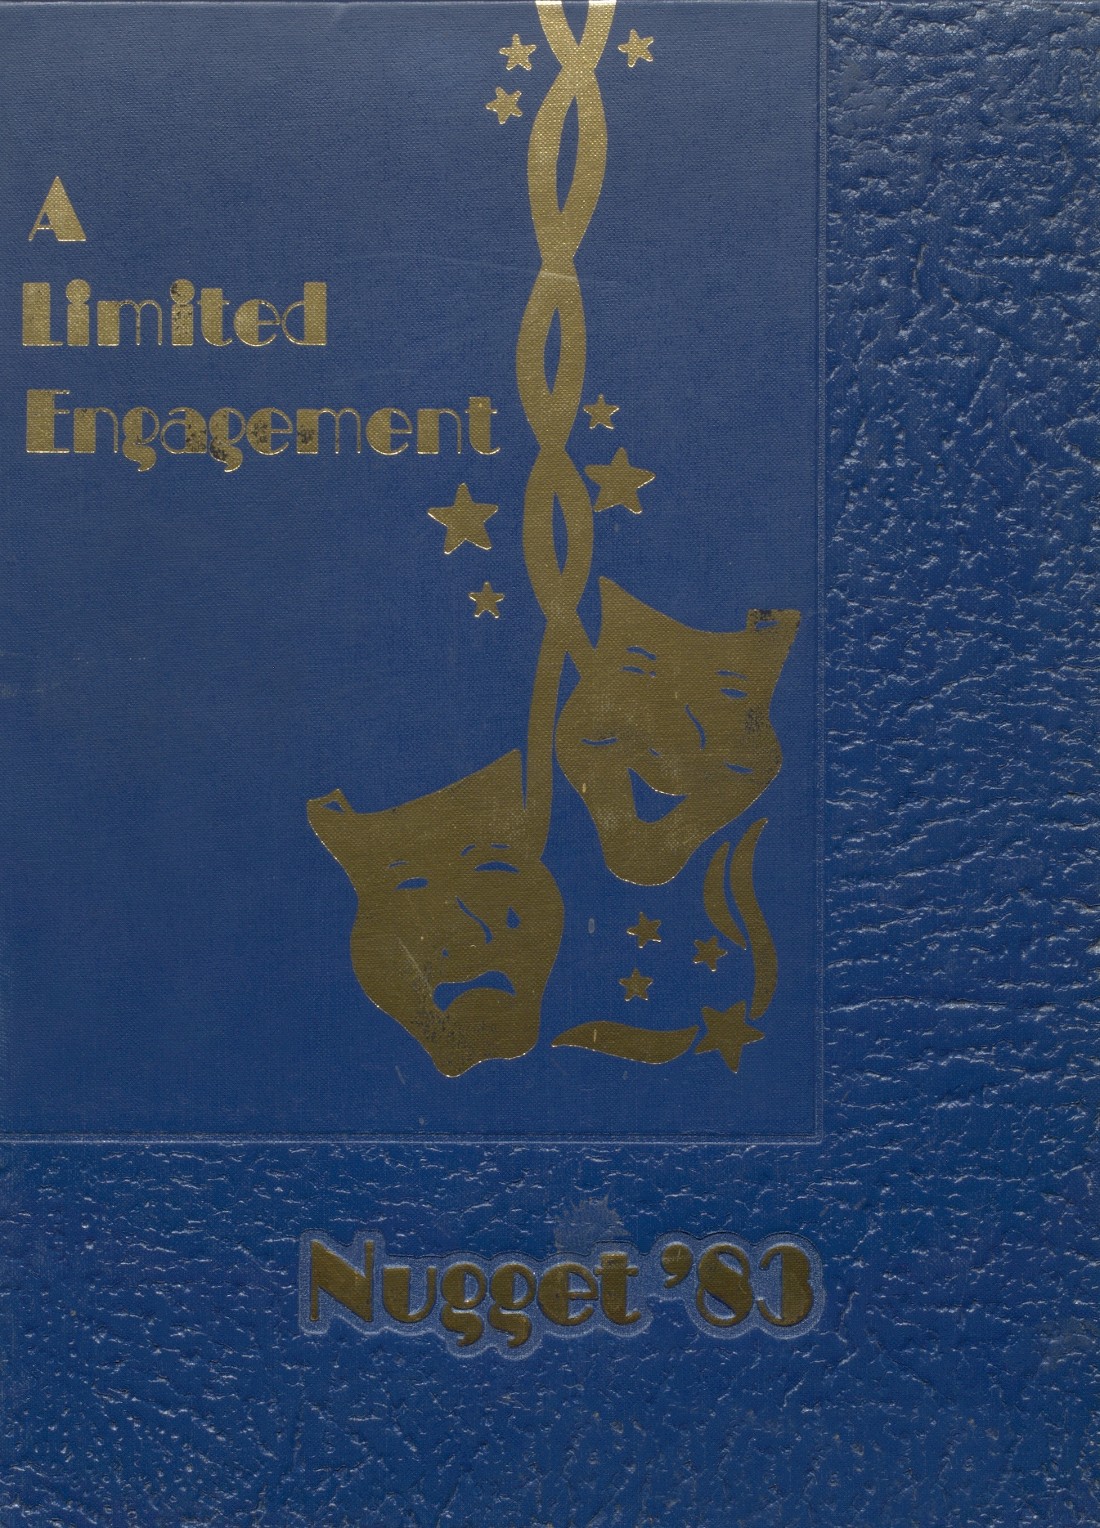 1983 yearbook from Butler High School from Butler, New Jersey for sale